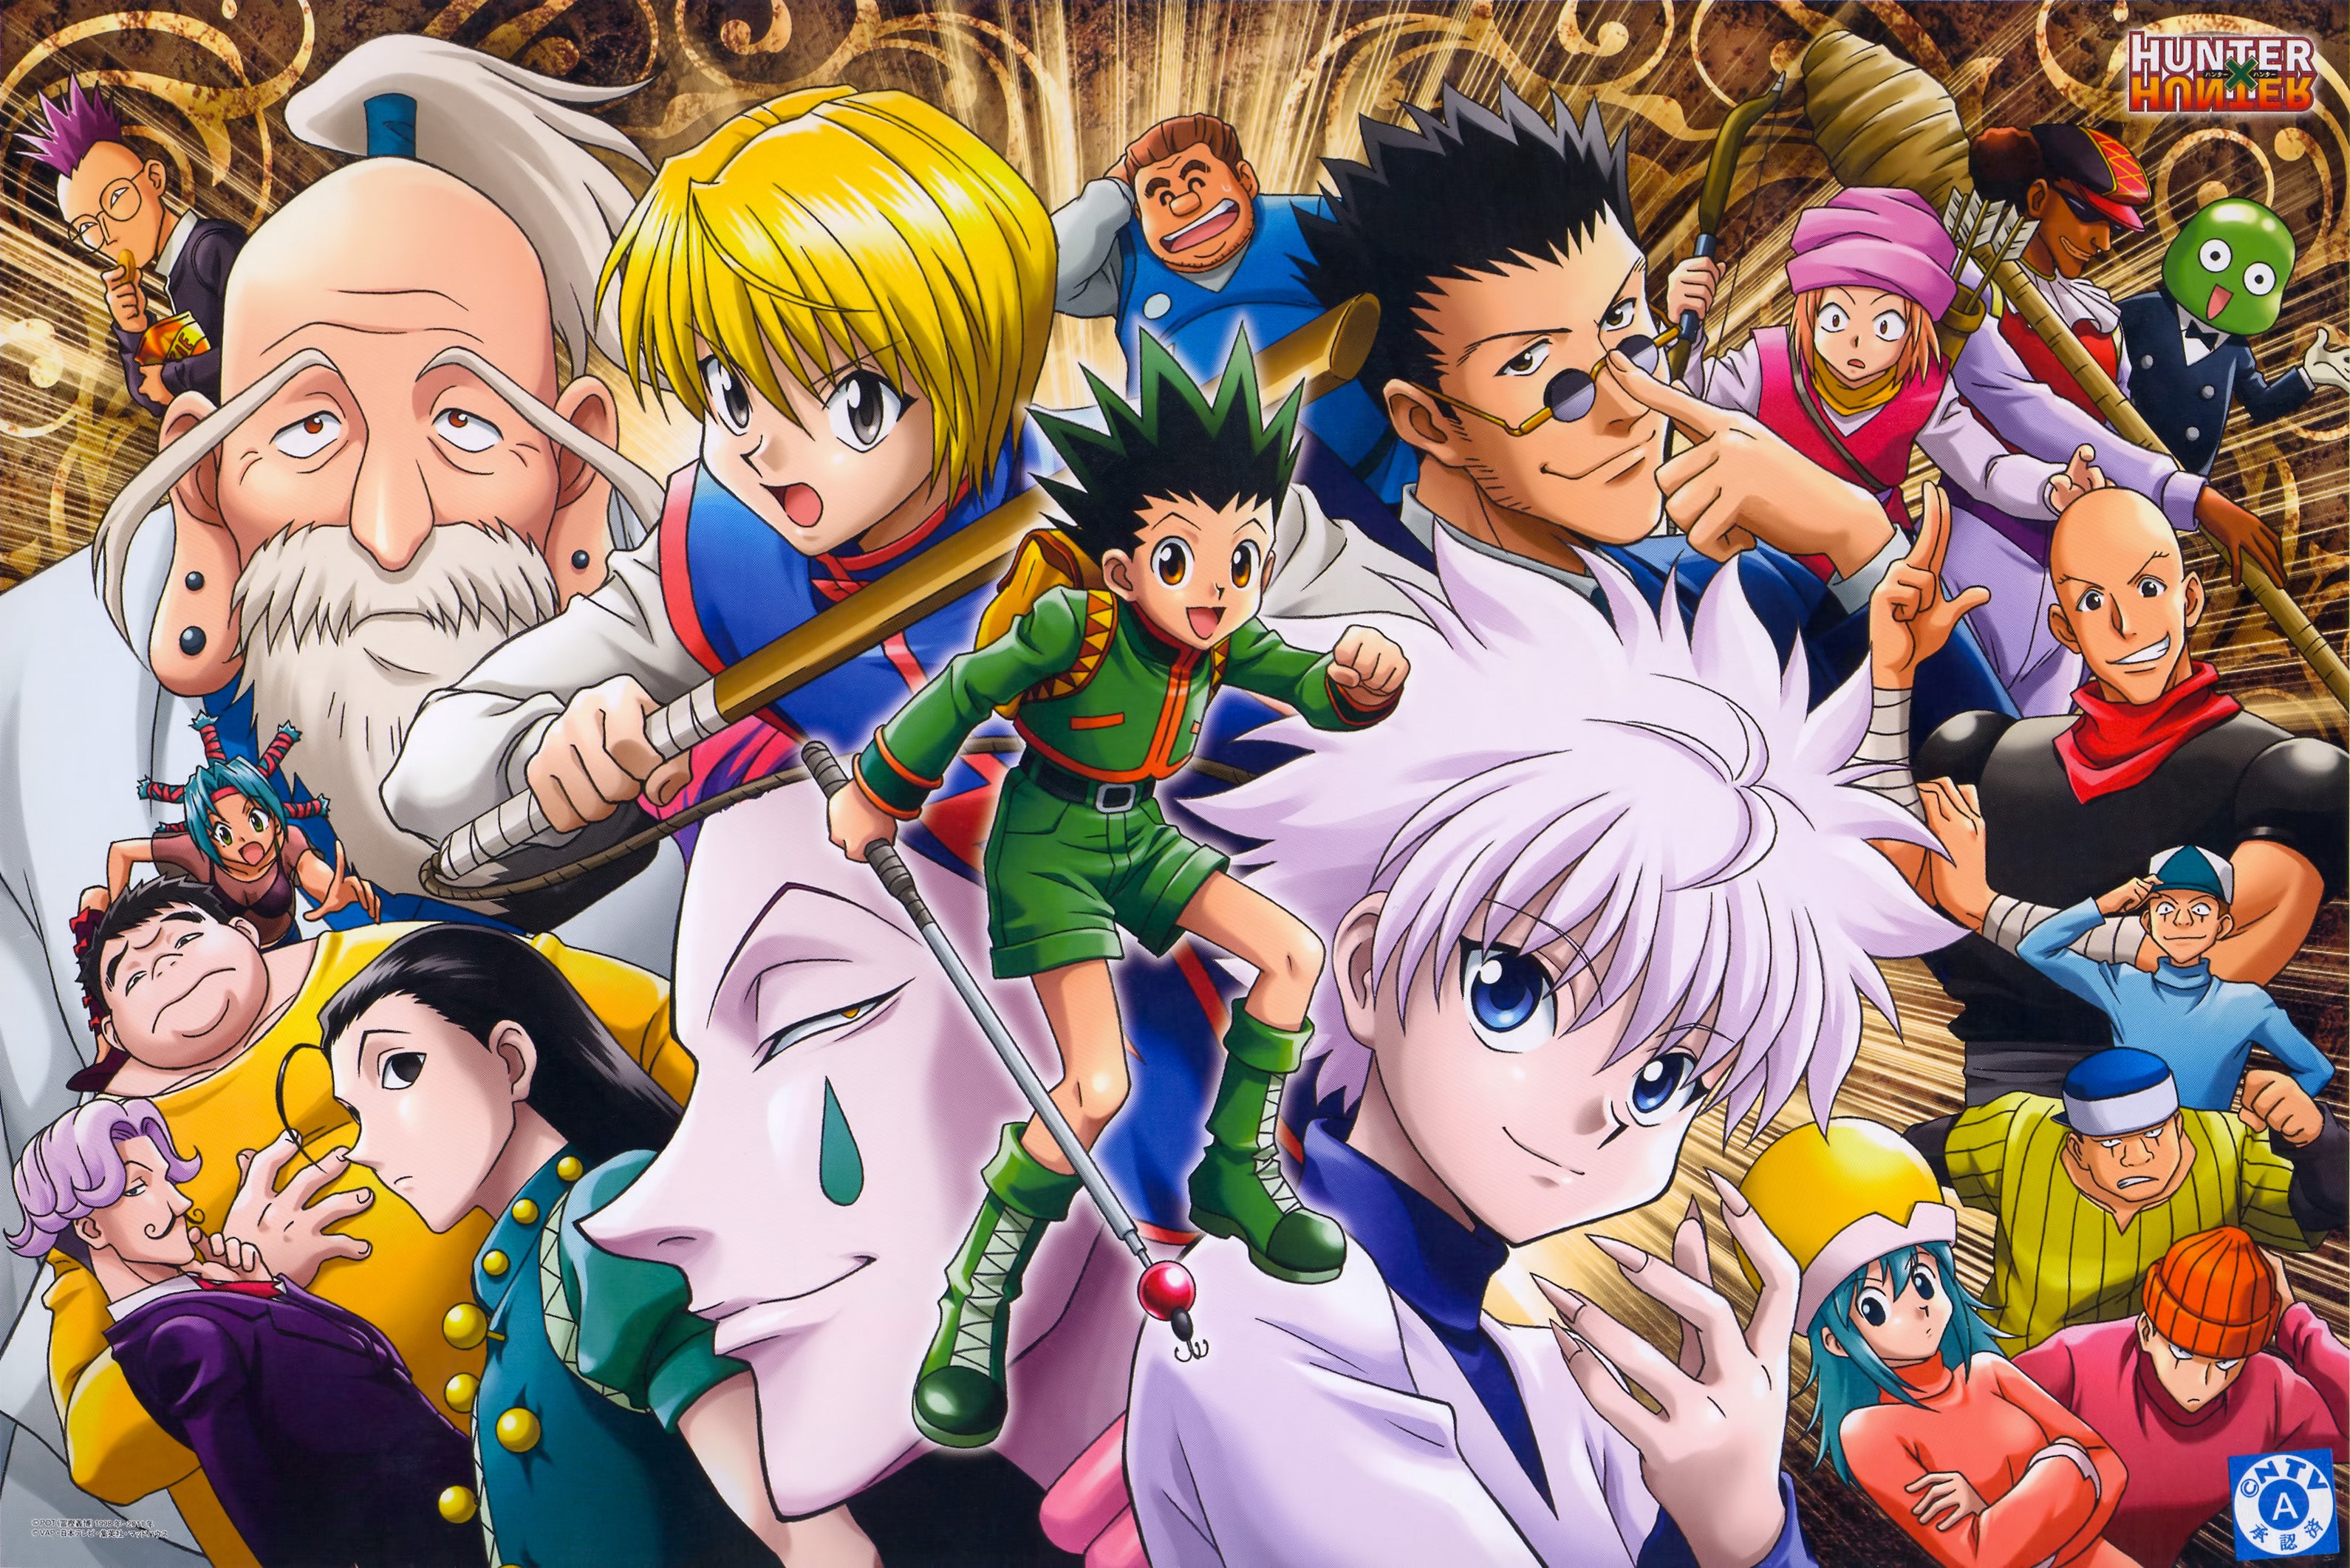 I made Departure (HxH) but with the Food Wars characters : r/anime